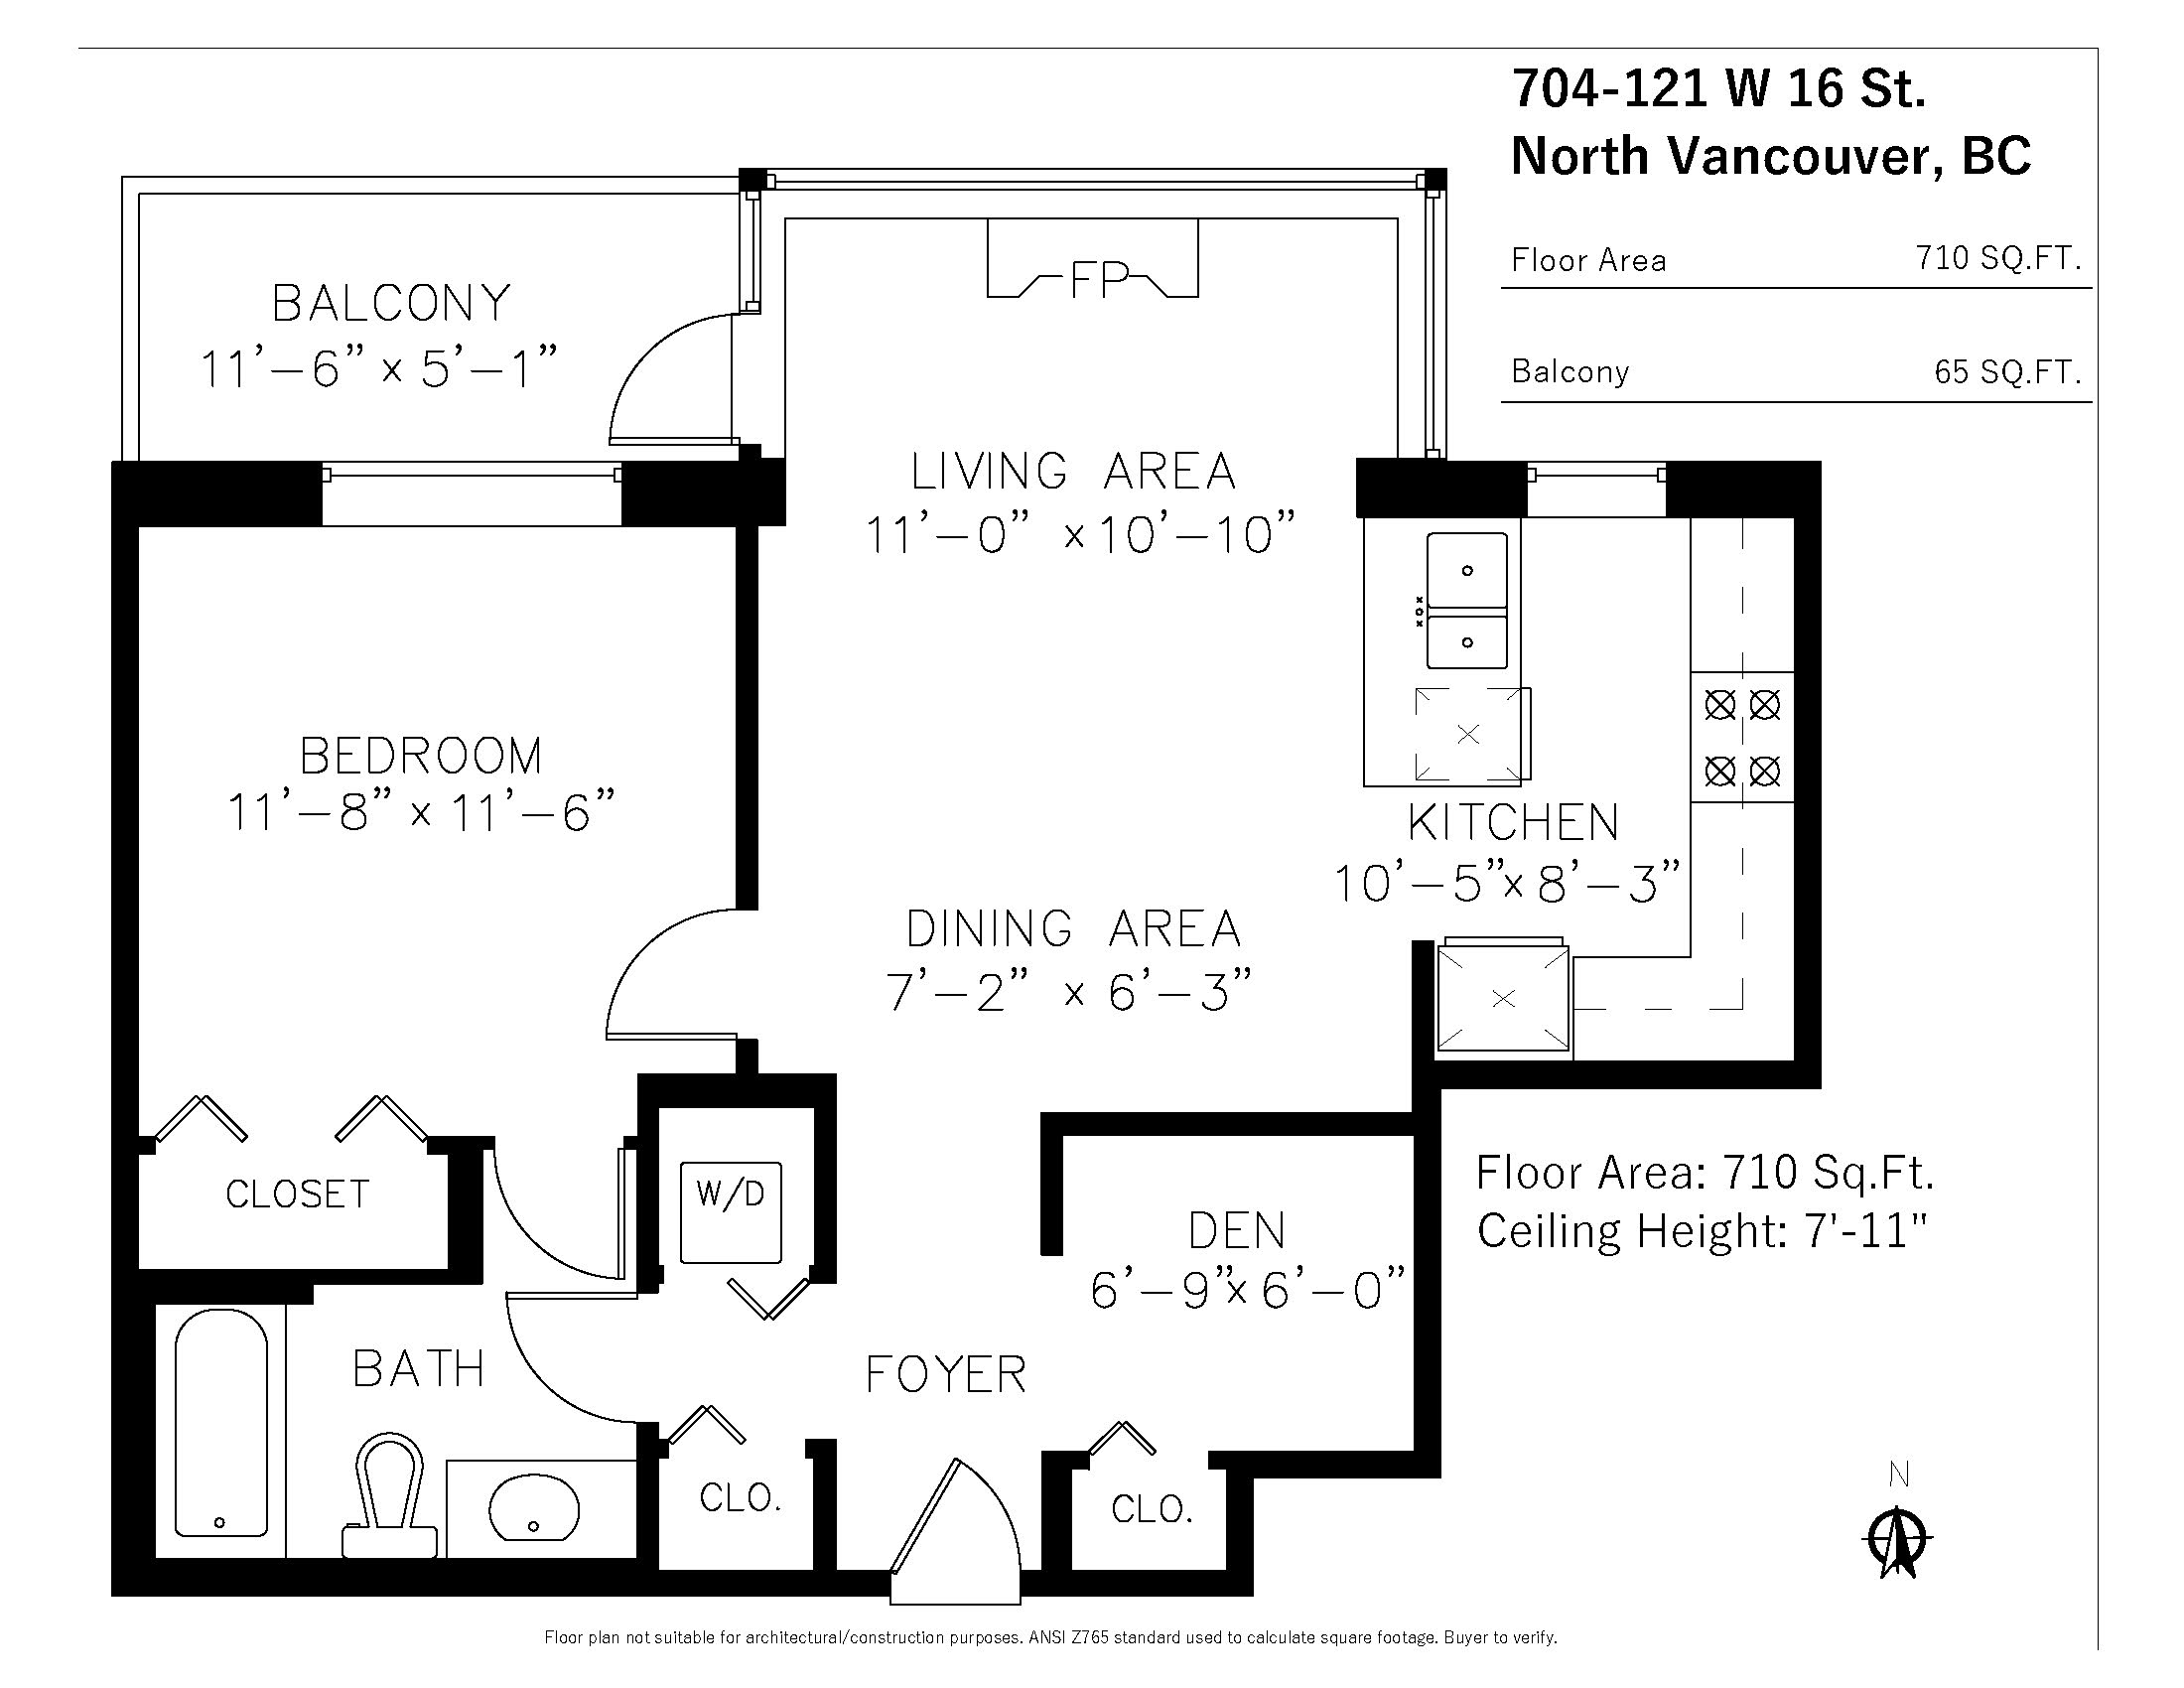 704 121 16th st North Vancouver - Floor Plan